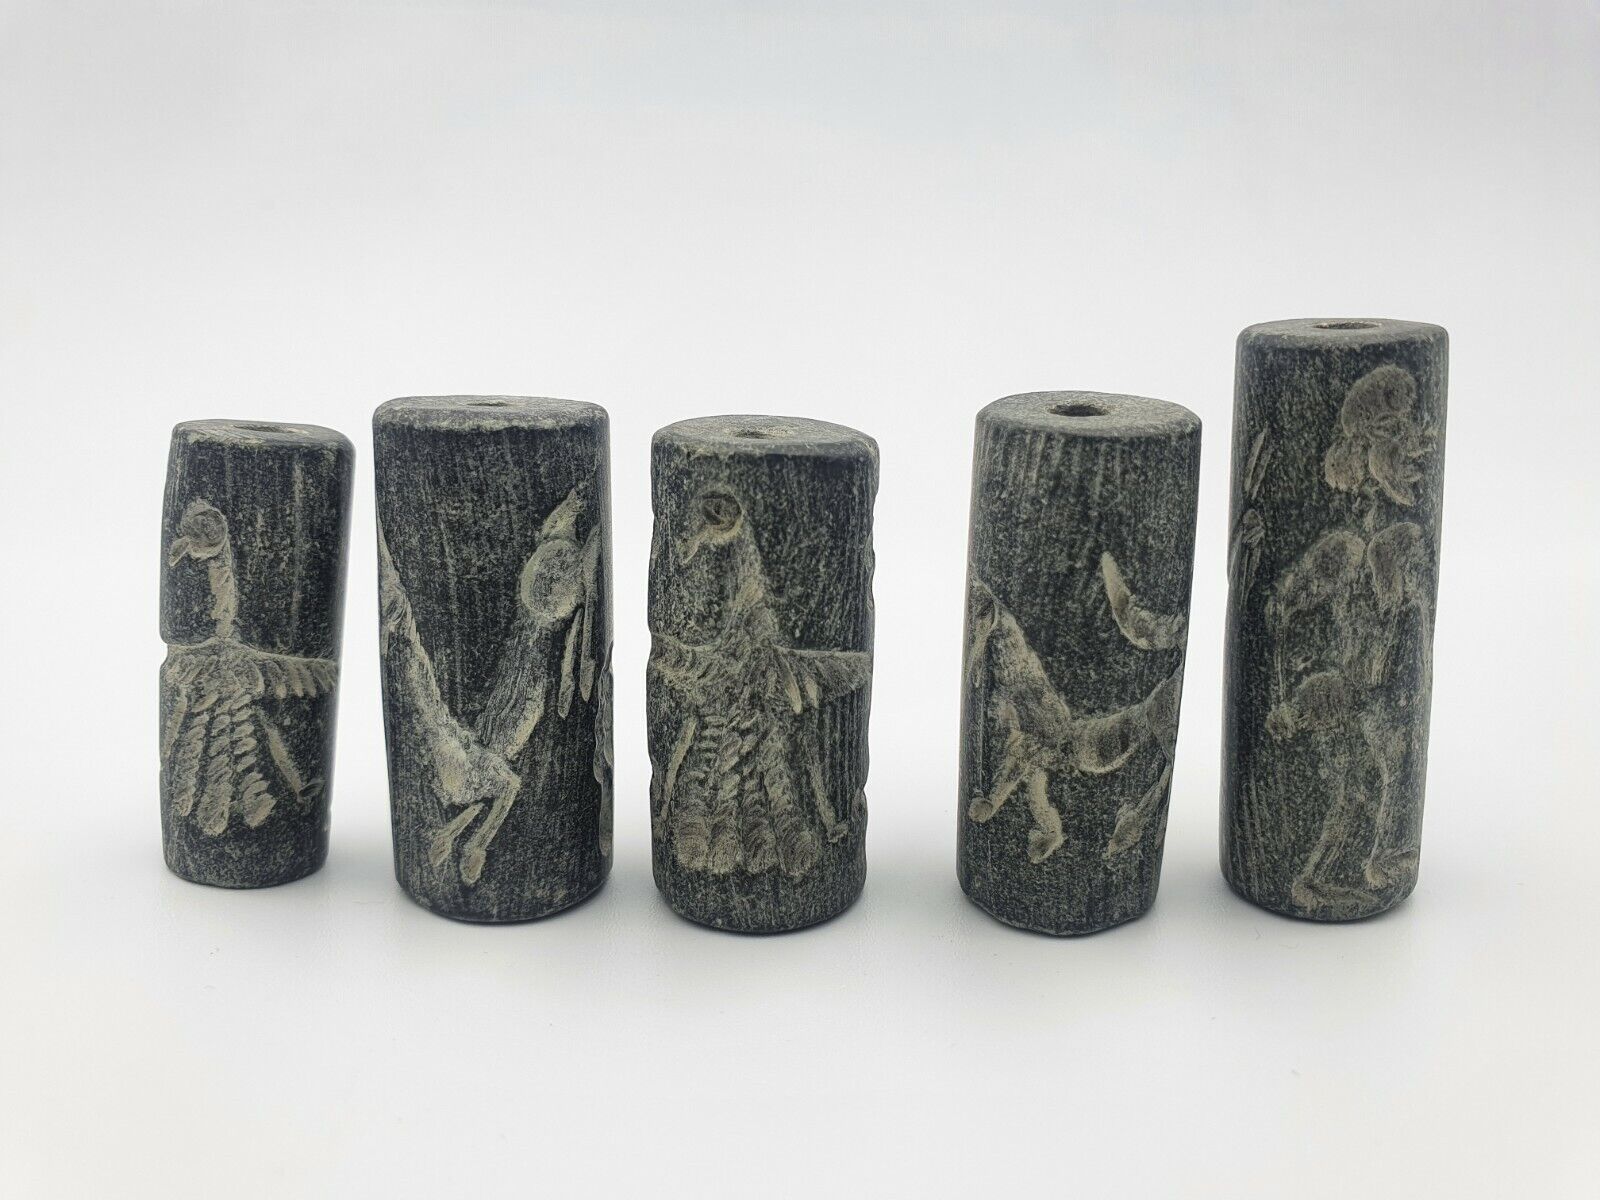 5 Pieces Lot Ancient Near Eastern Genuine Black Stone Cylinder Seals 